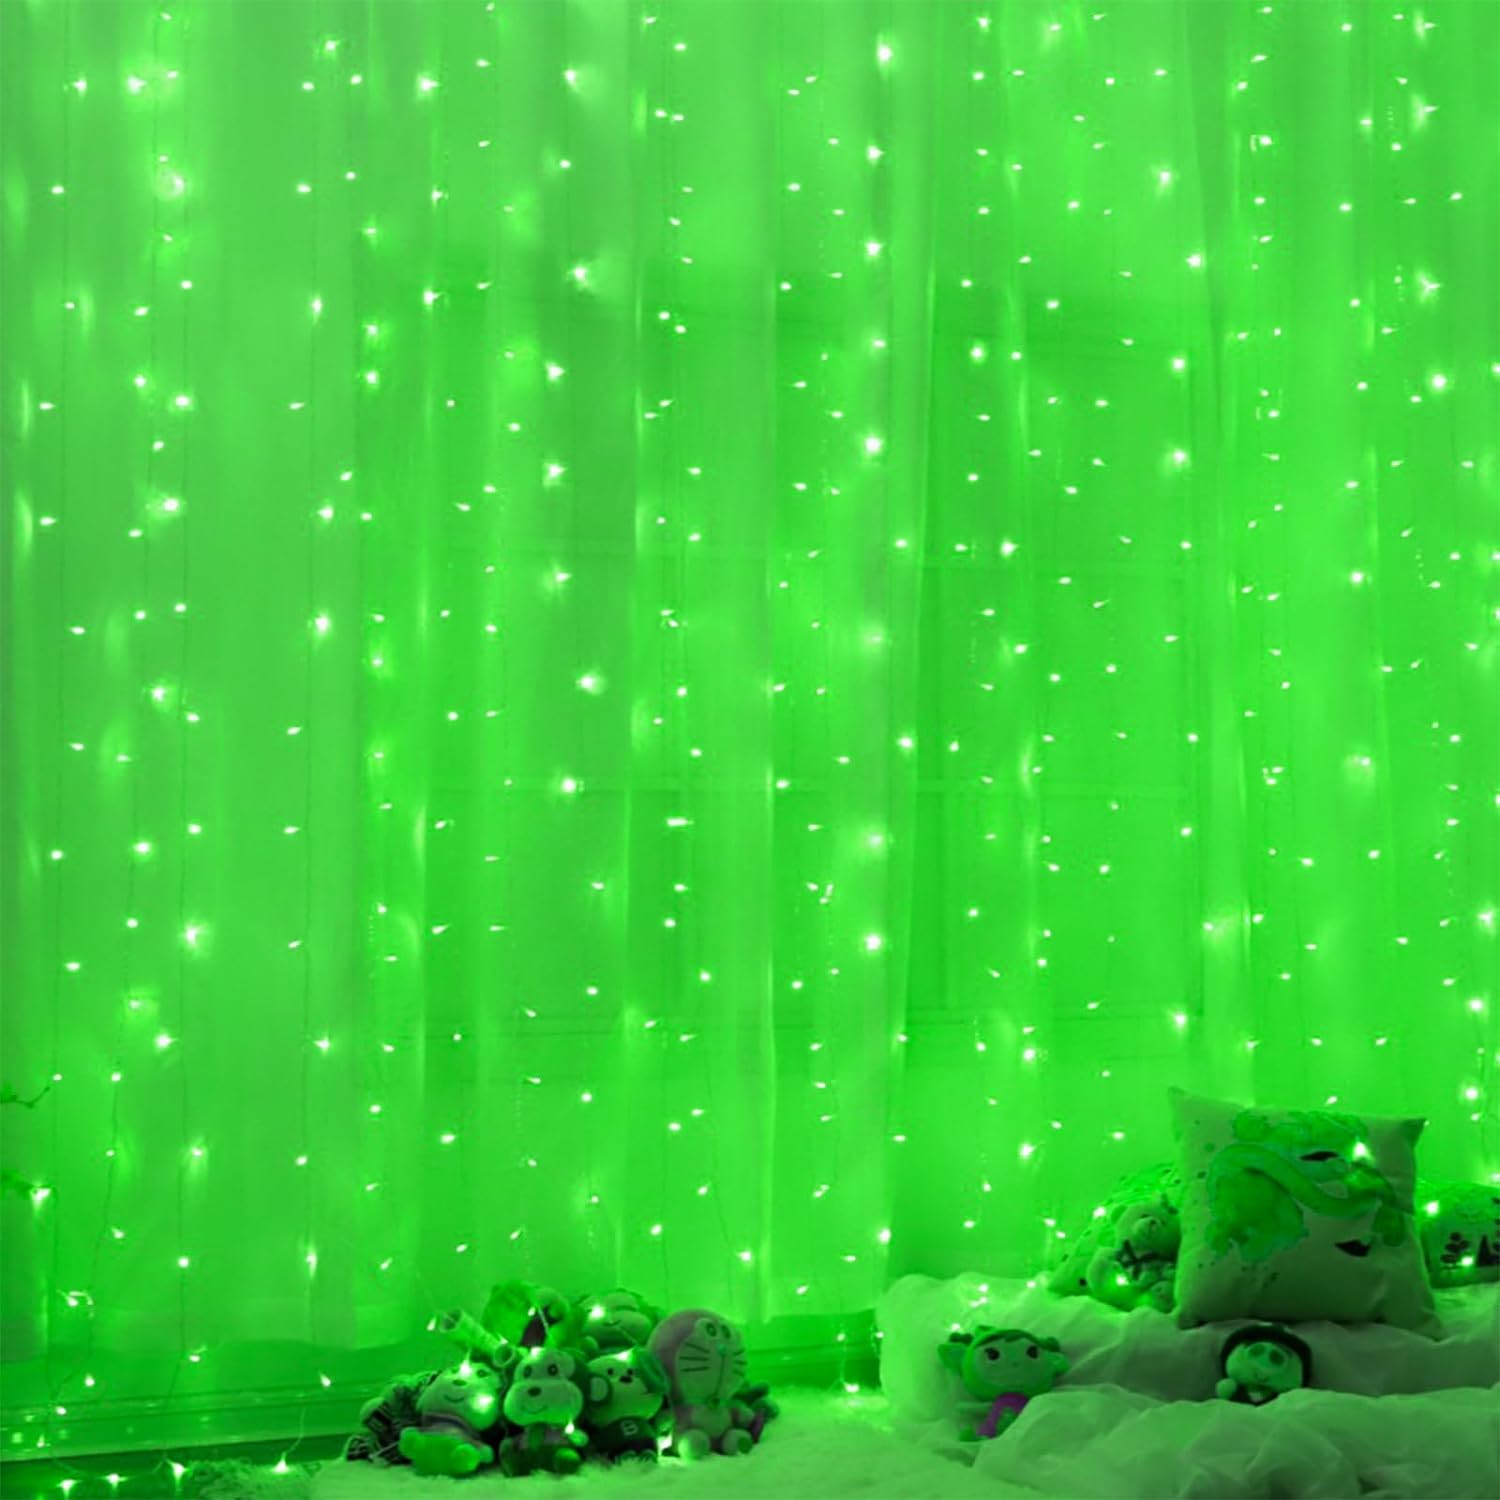 Twinkle Star 300 LED Window Fairy Curtain String Lights, 8 Modes Fairy Lights for St Patrick' Day Halloween Christmas Bedroom Wedding Party Home Garden Outdoor Indoor Wall Decorations, Green